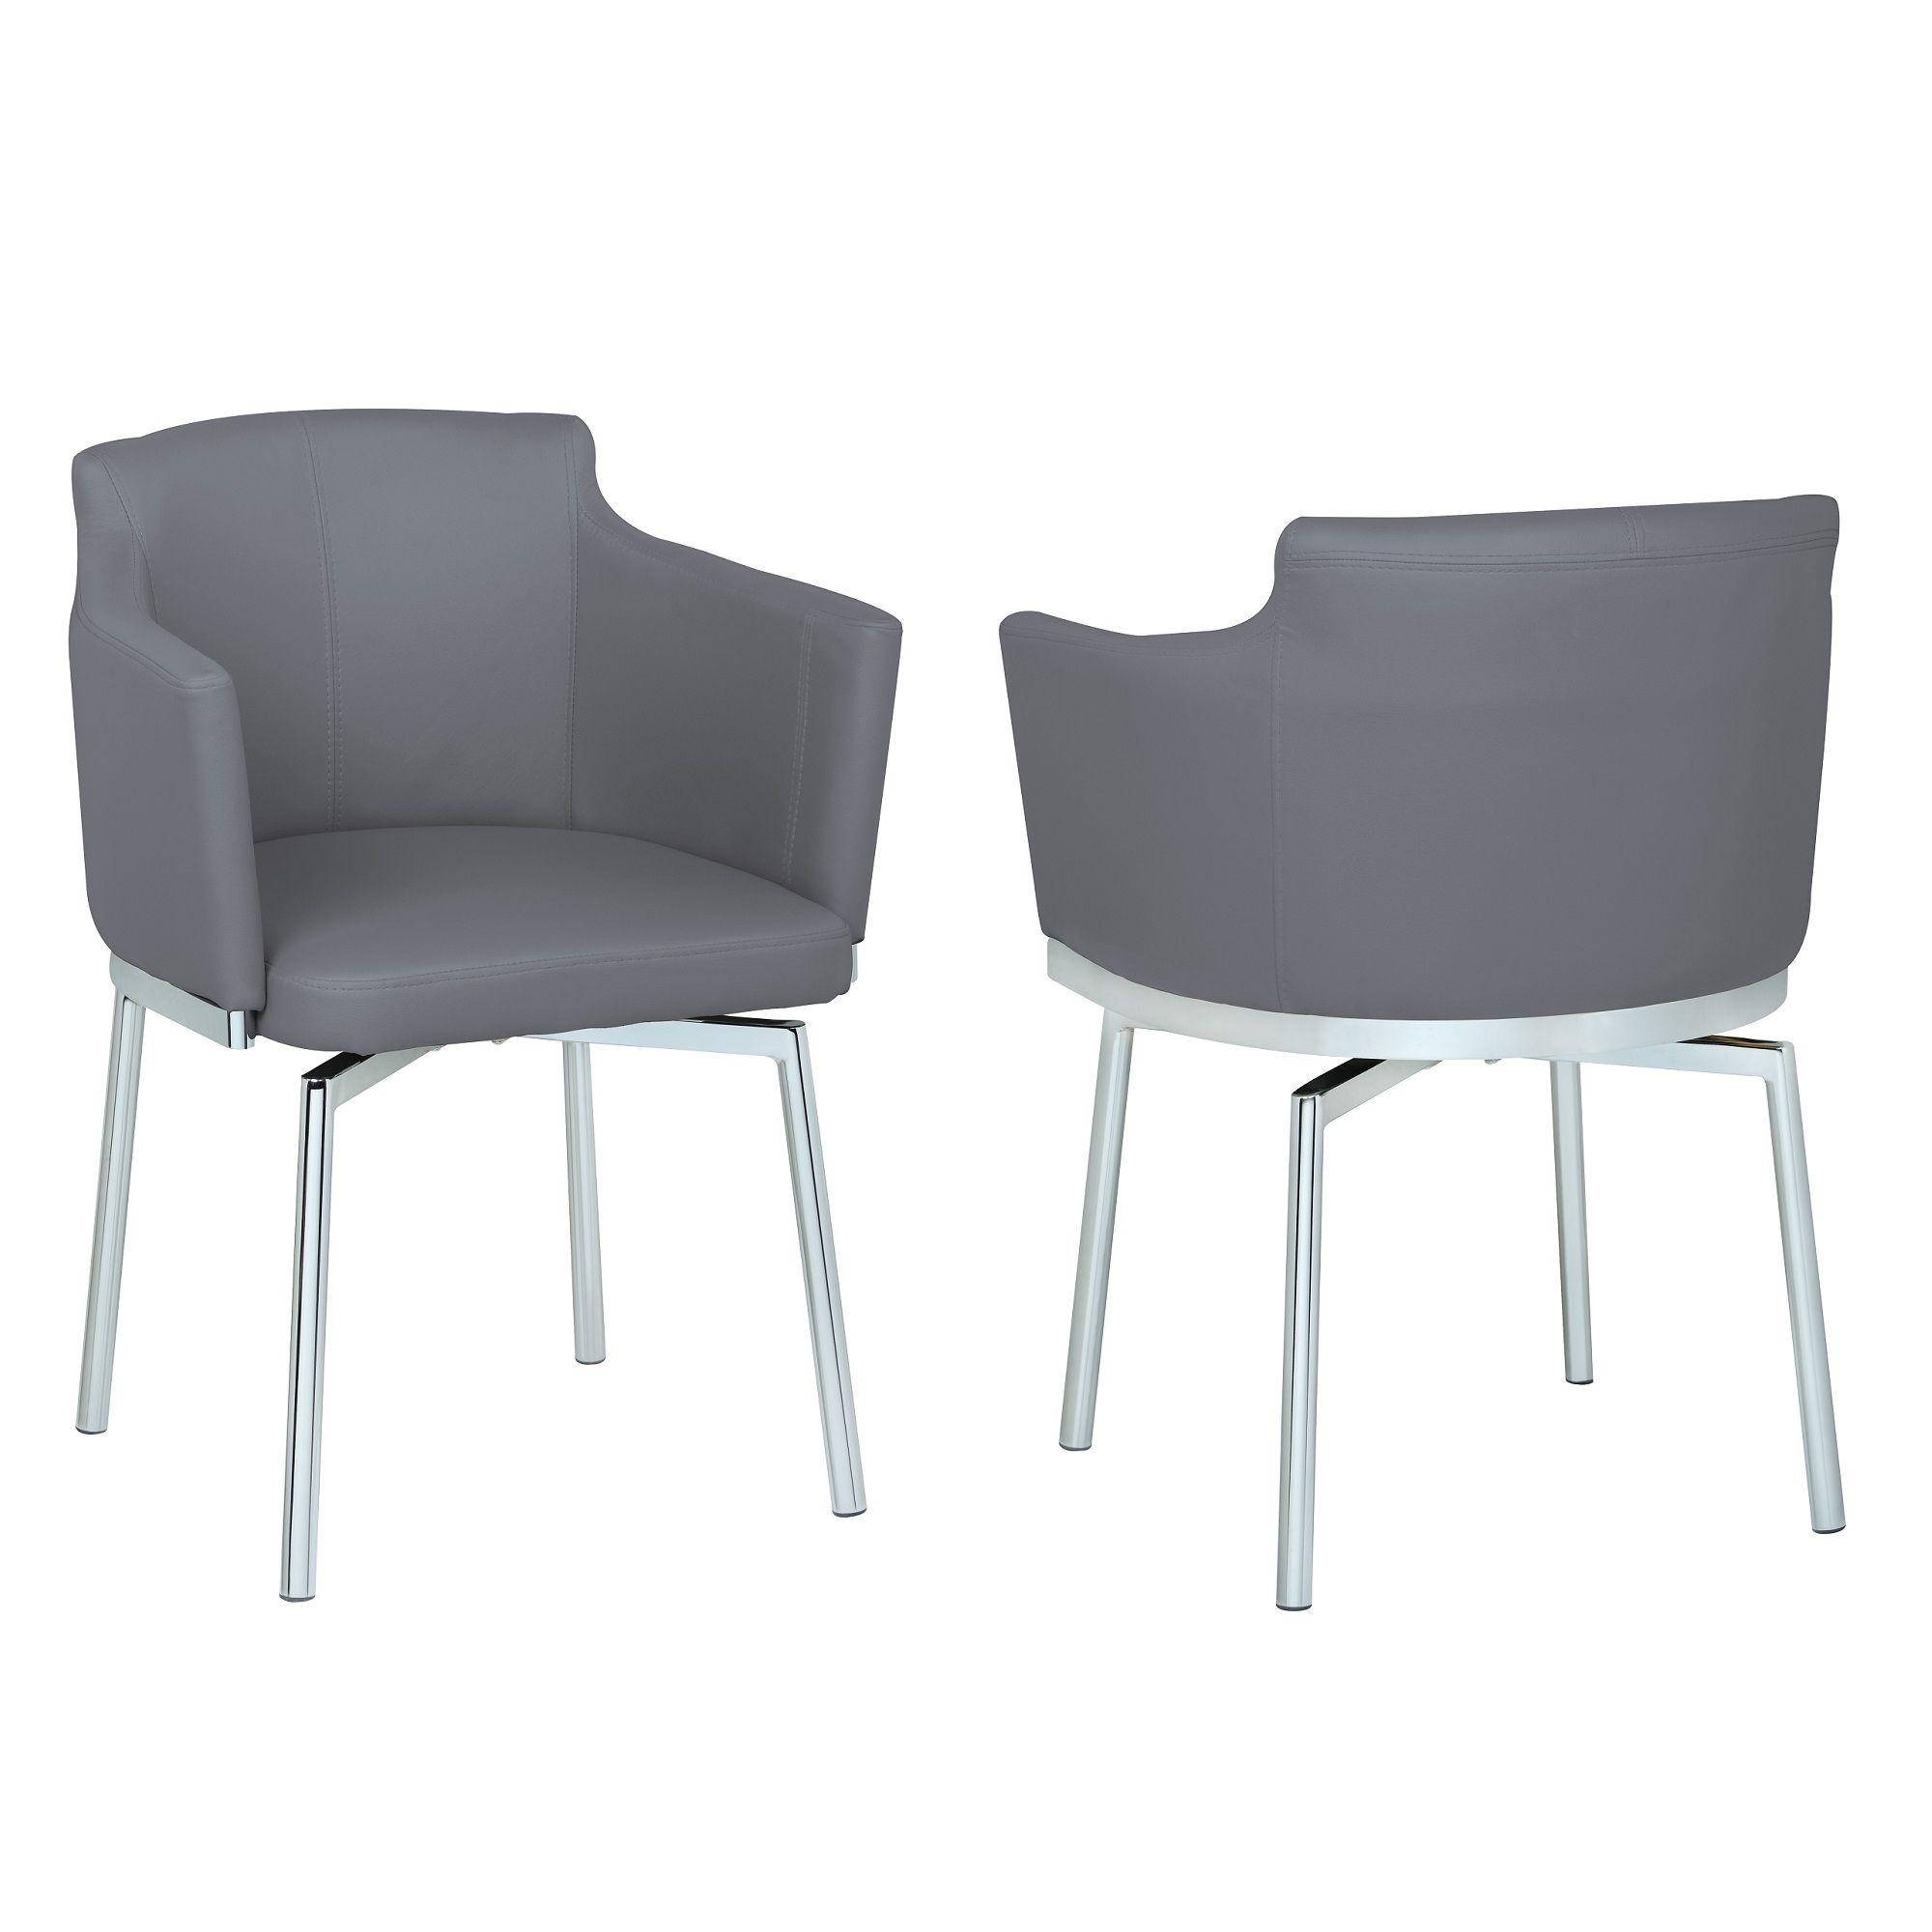 Modern Dining Chair Set Dusty DUSTY-AC-GRY-KD-Set-2 in Gray Eco Leather